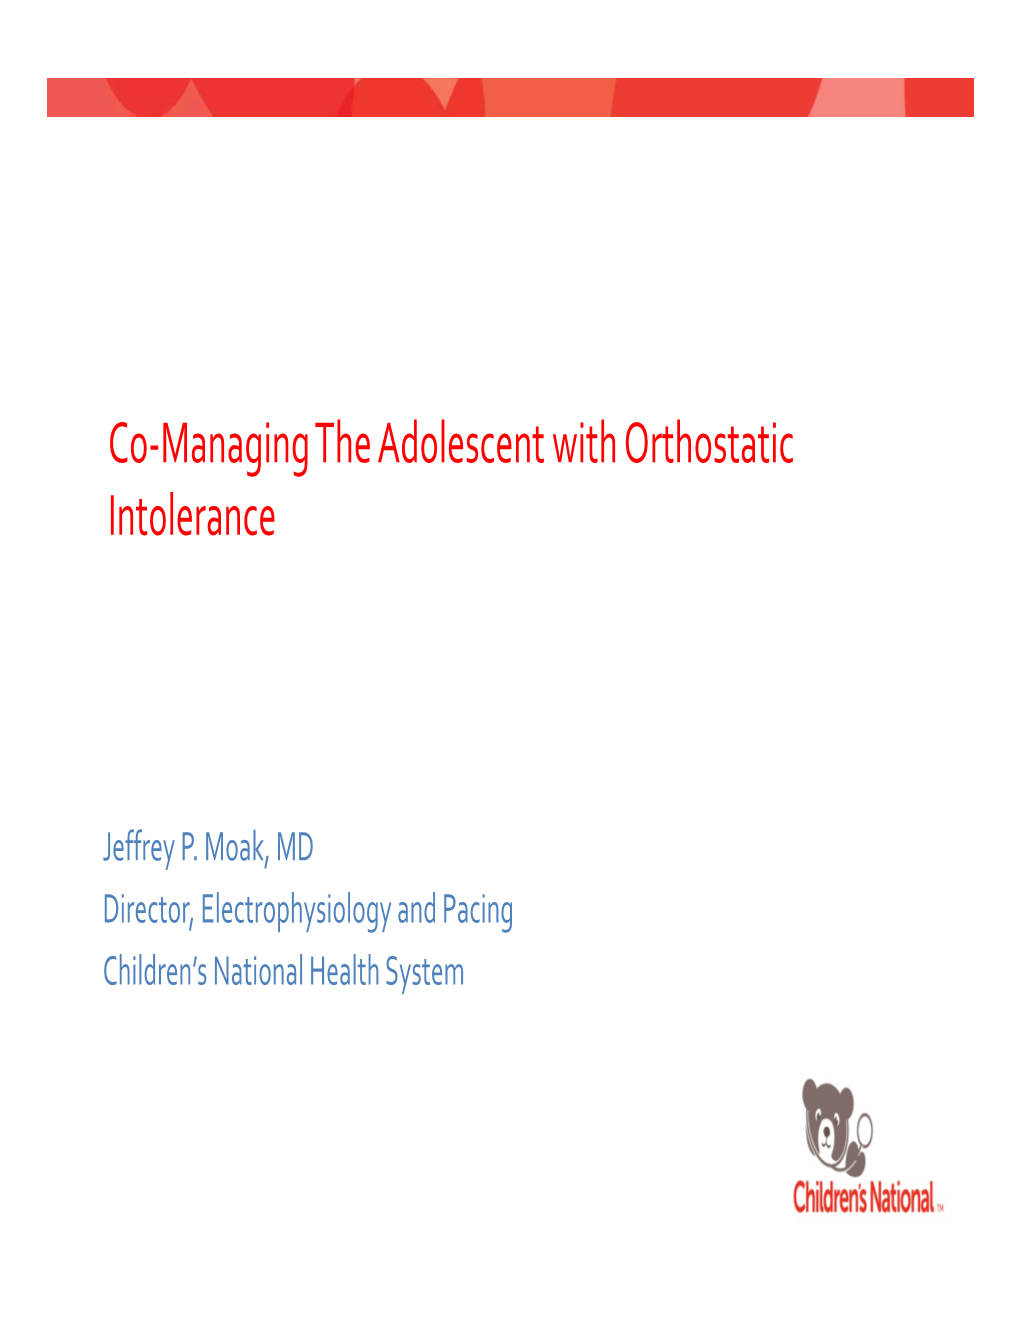 Co-Managing the Adolescent with Orthostatic Intolerance